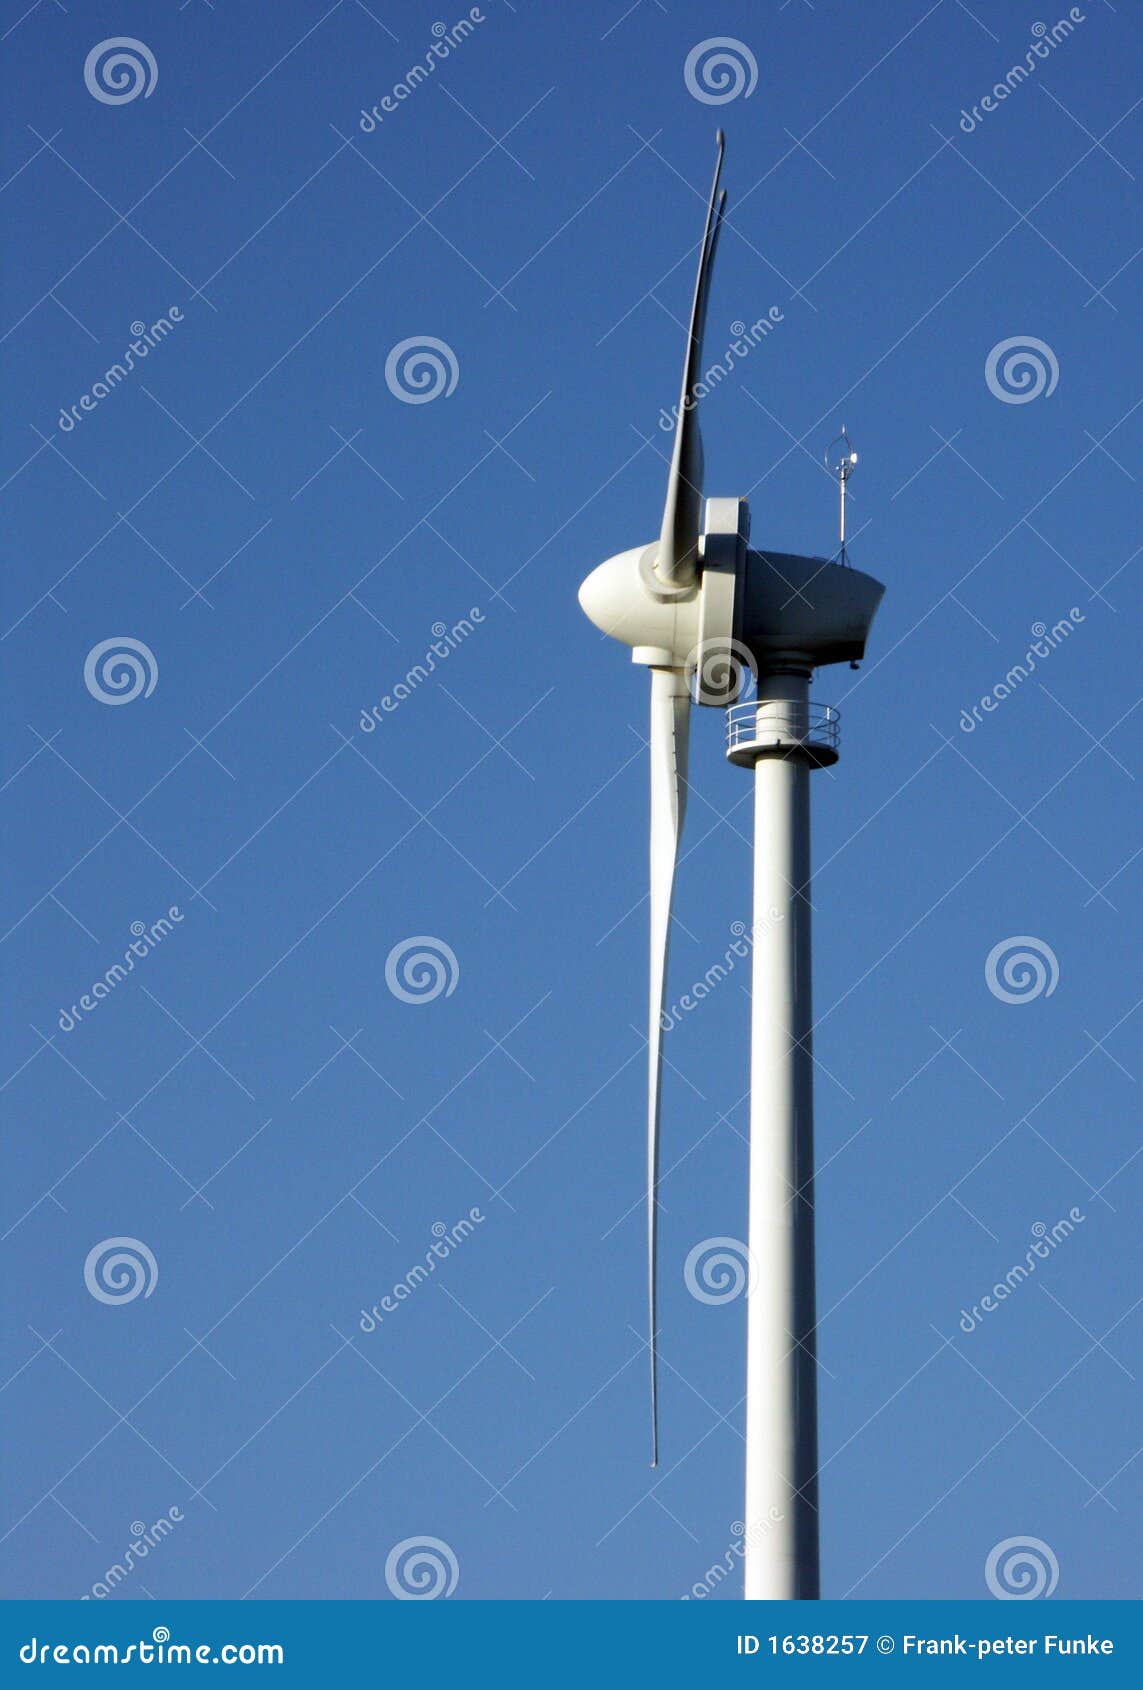 Wind Powered Generator Royalty Free Stock Photography - Image: 1638257